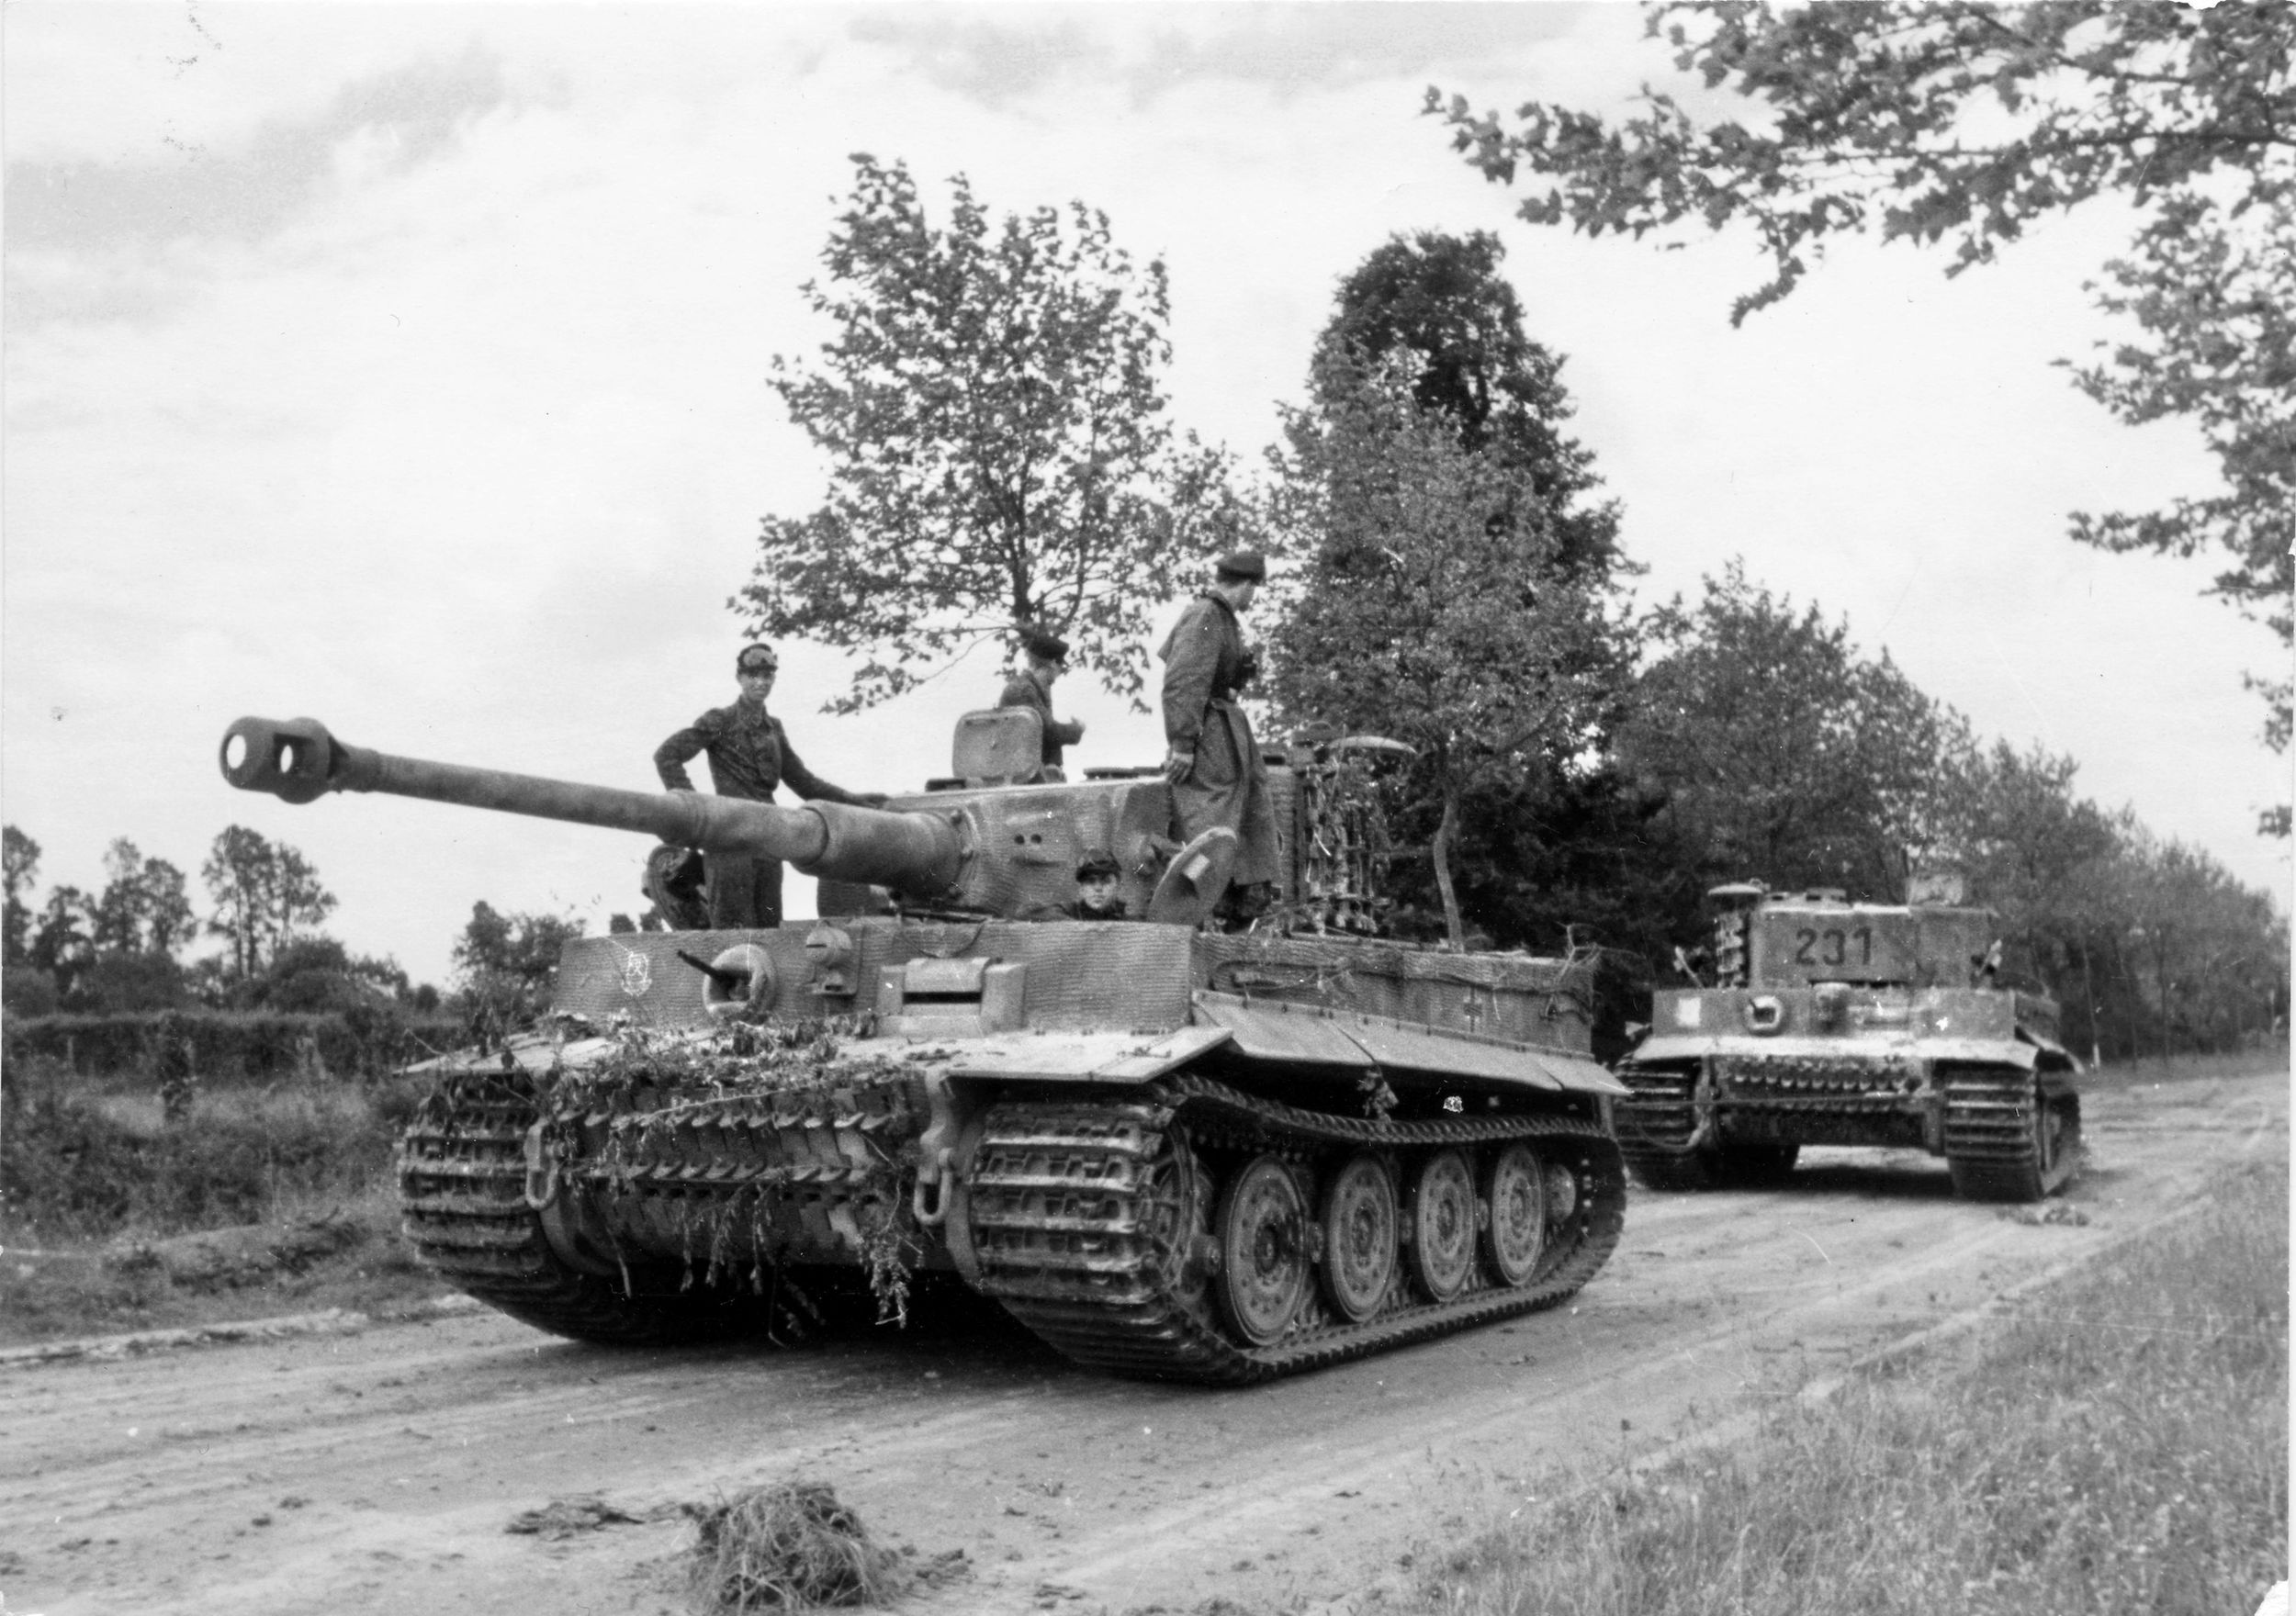 The crew of a German Tiger tank; pulls a damaged Tiger away from the scene of the fighting at Villers-Bocage. German armored units were usually forbidden from executing recovery operations like this due to Allied air superiority, and the crewmen on top of the tank may be watching for Allied fighter bombers.